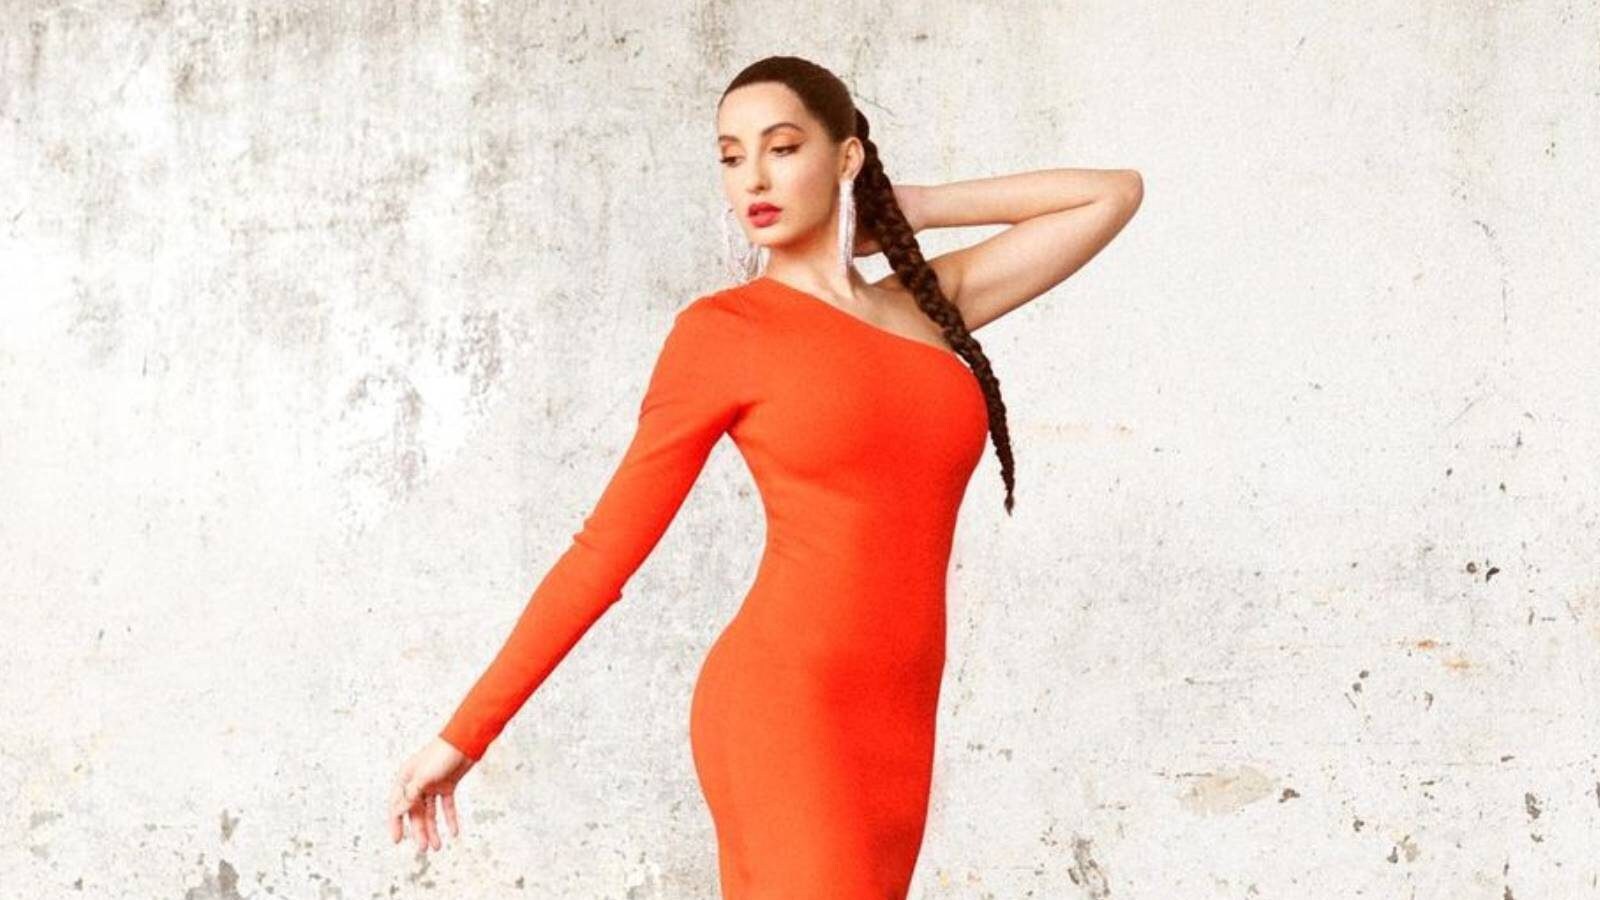 Nora Fatehi oozes glamour in a sultry bodycon dress with plunging neckline